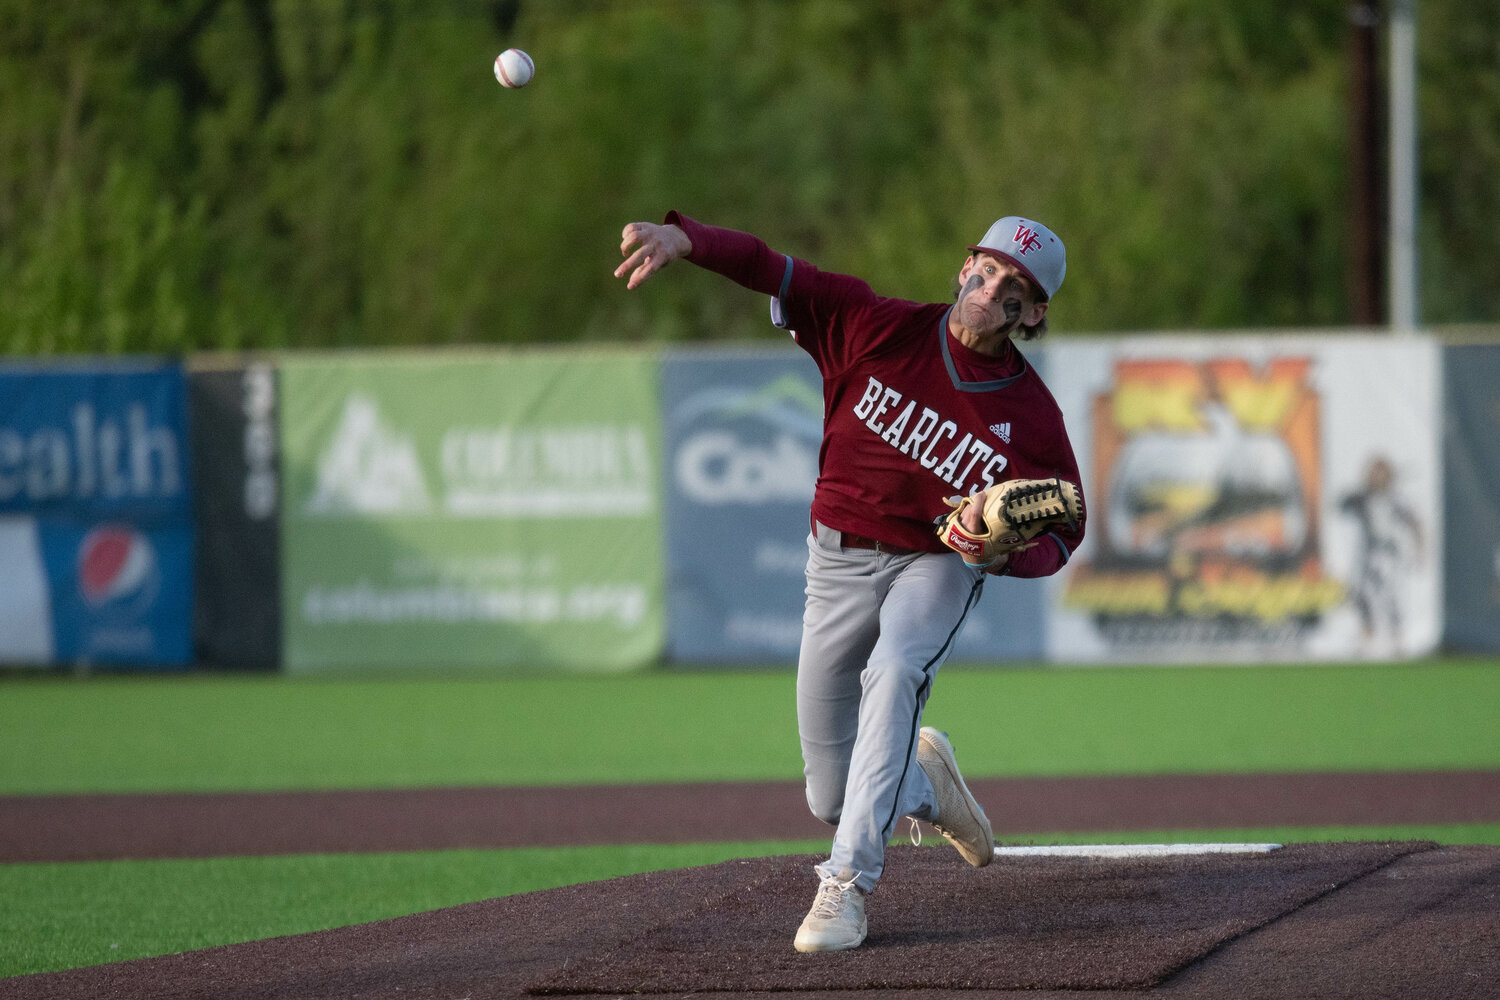 Braden Jones throws a pitch during W.F. West's 9-0 win over Ridgefield in the 2A District 4 Tournament semifinals, May 10 at the RORC.